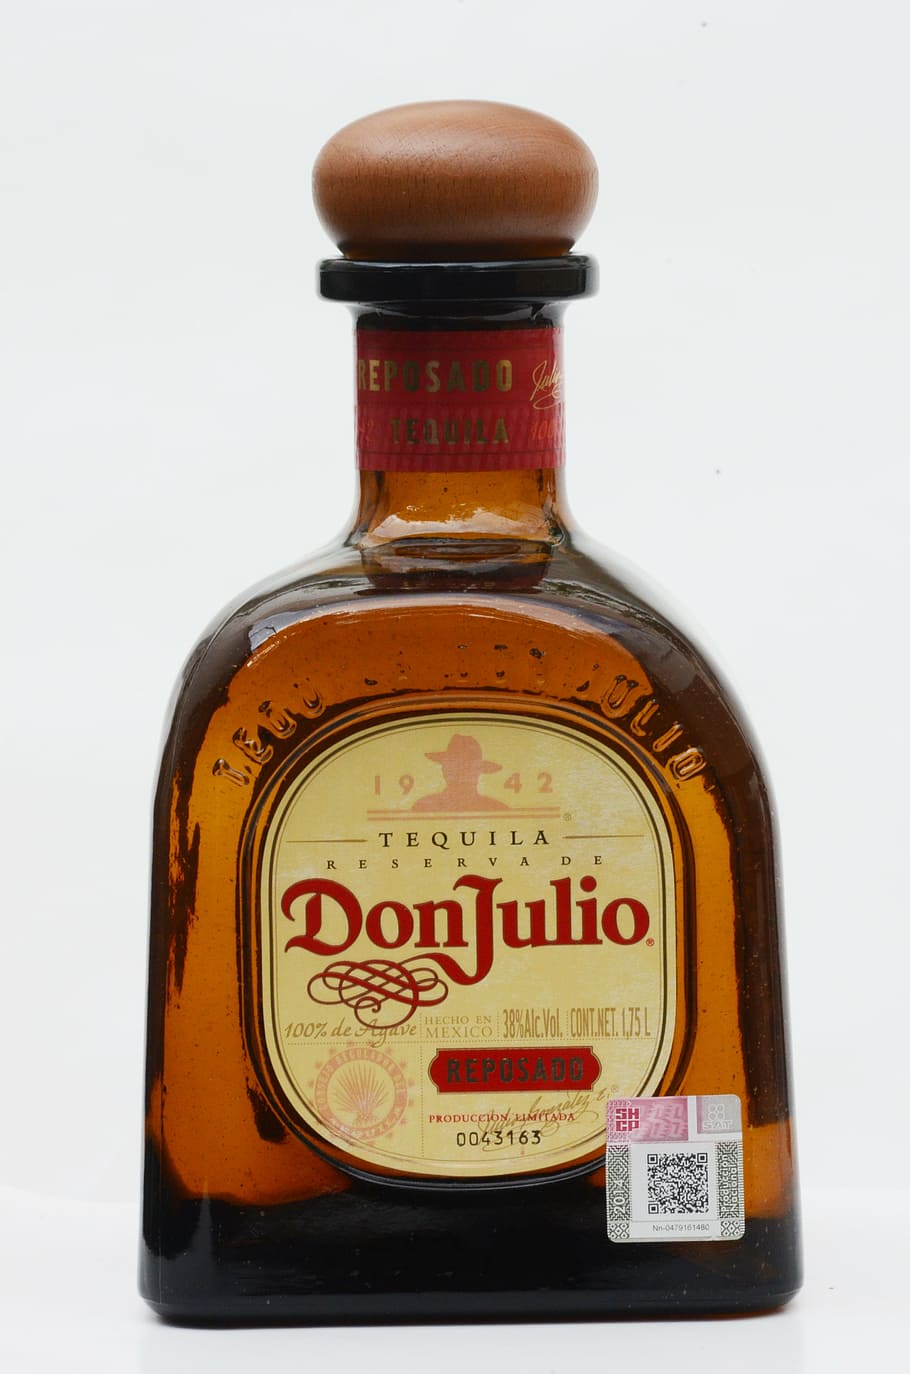 don julio tequila, premium tequila, tequila jalisco, mexican tequila, bottle, alcohol, drink, white background, studio shot, container